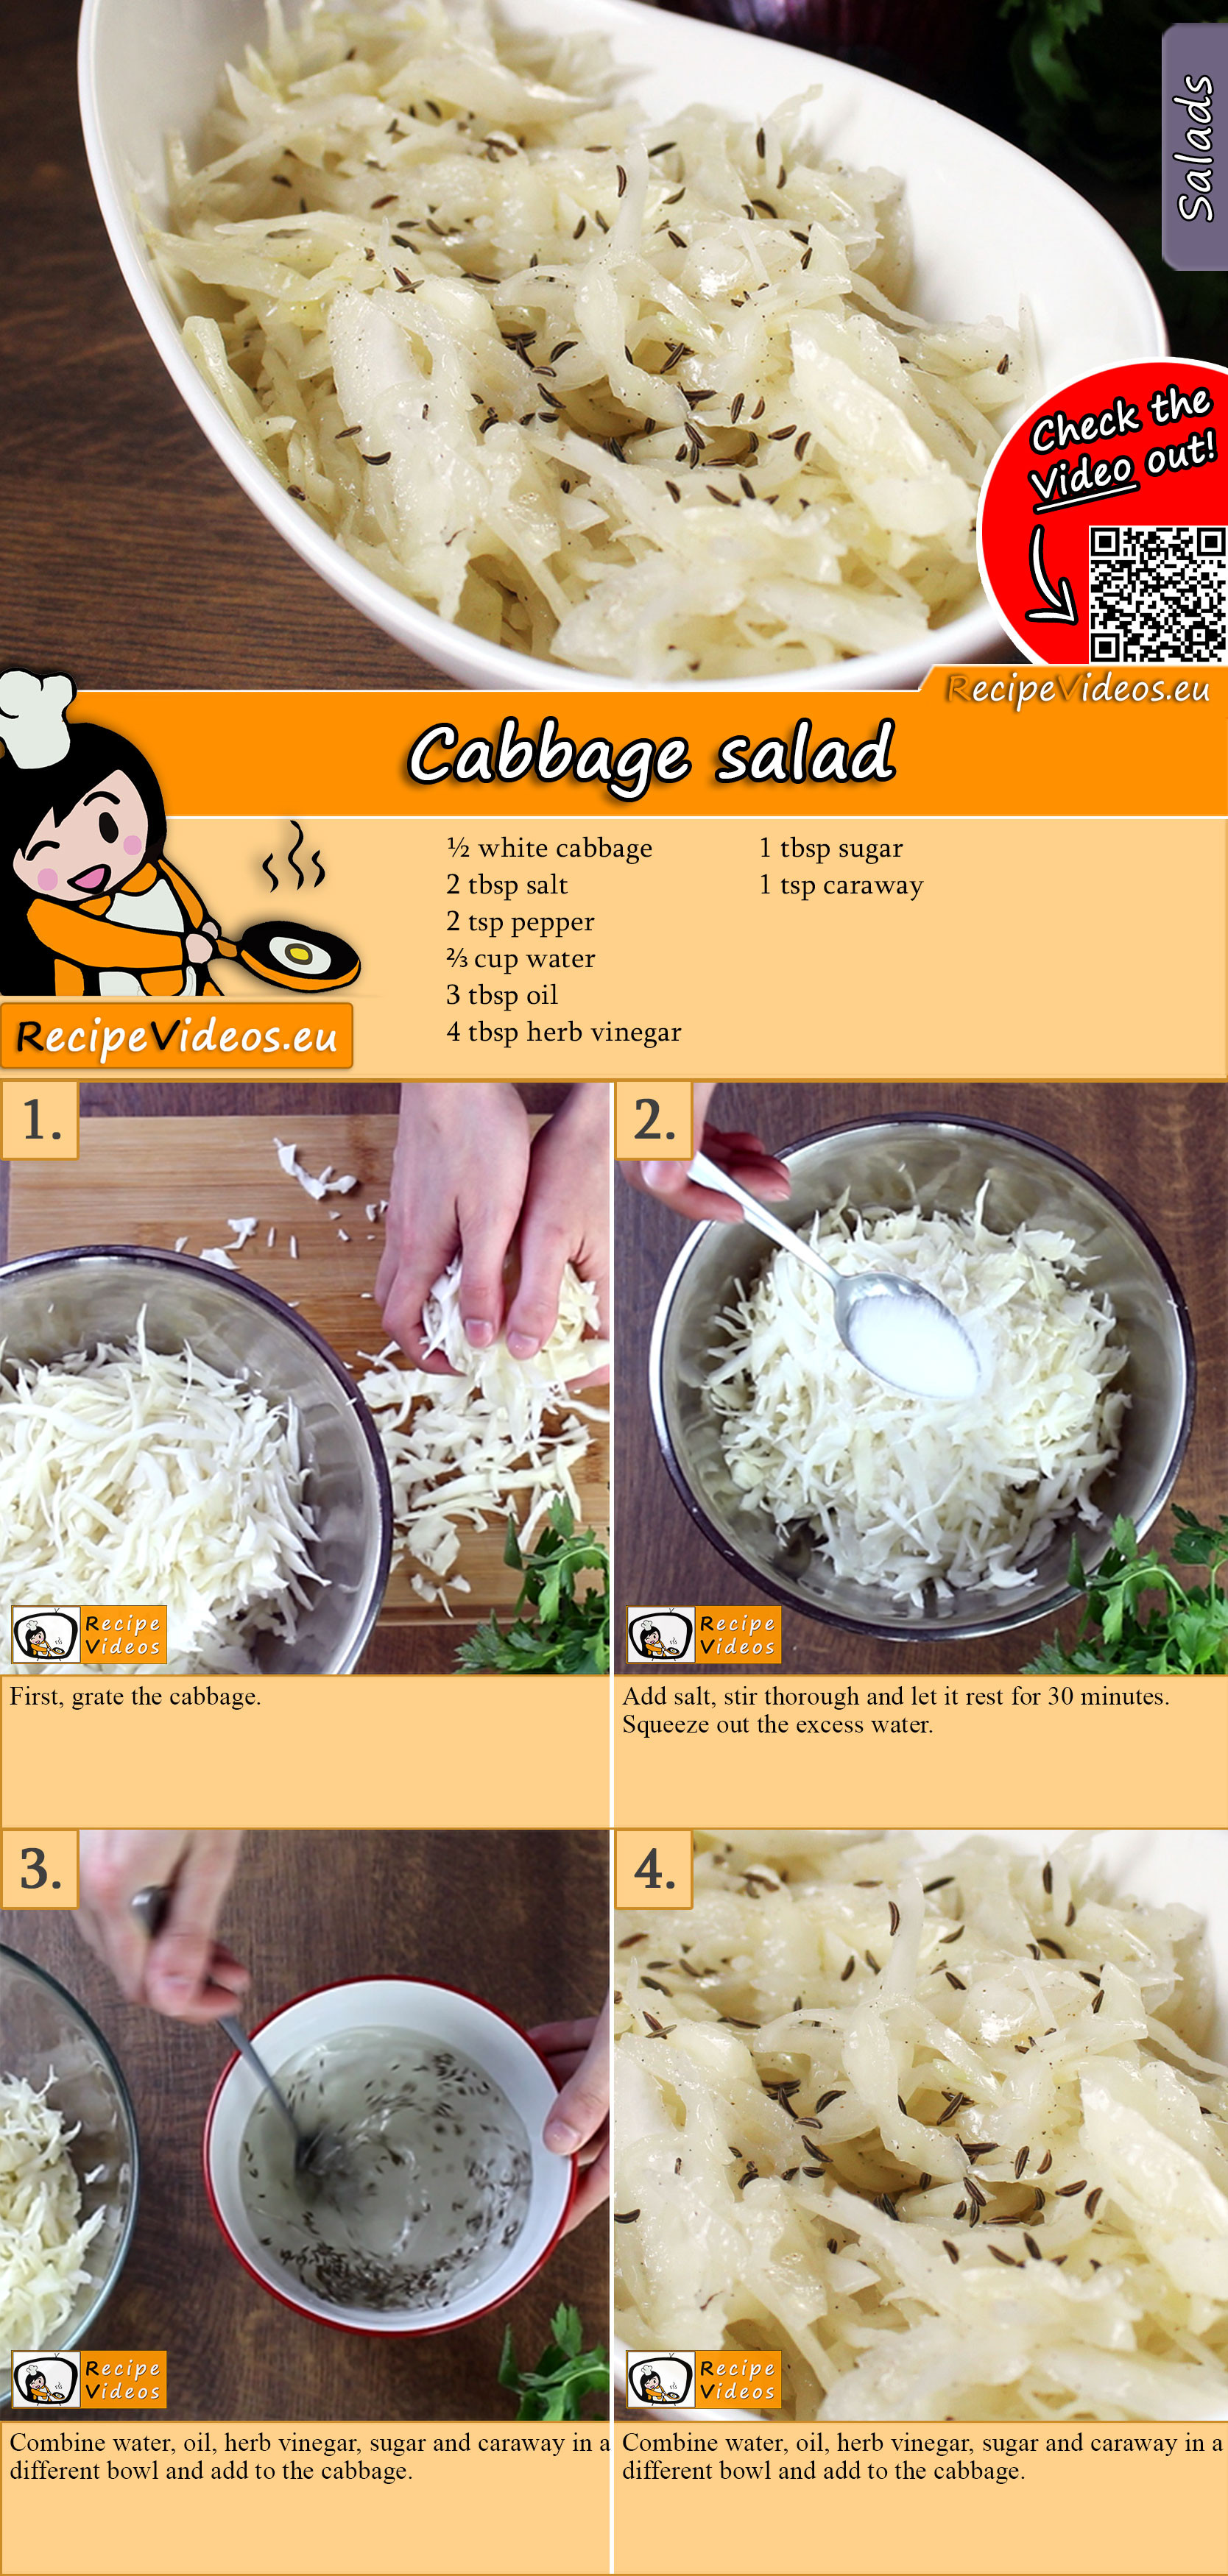 Cabbage salad recipe with video